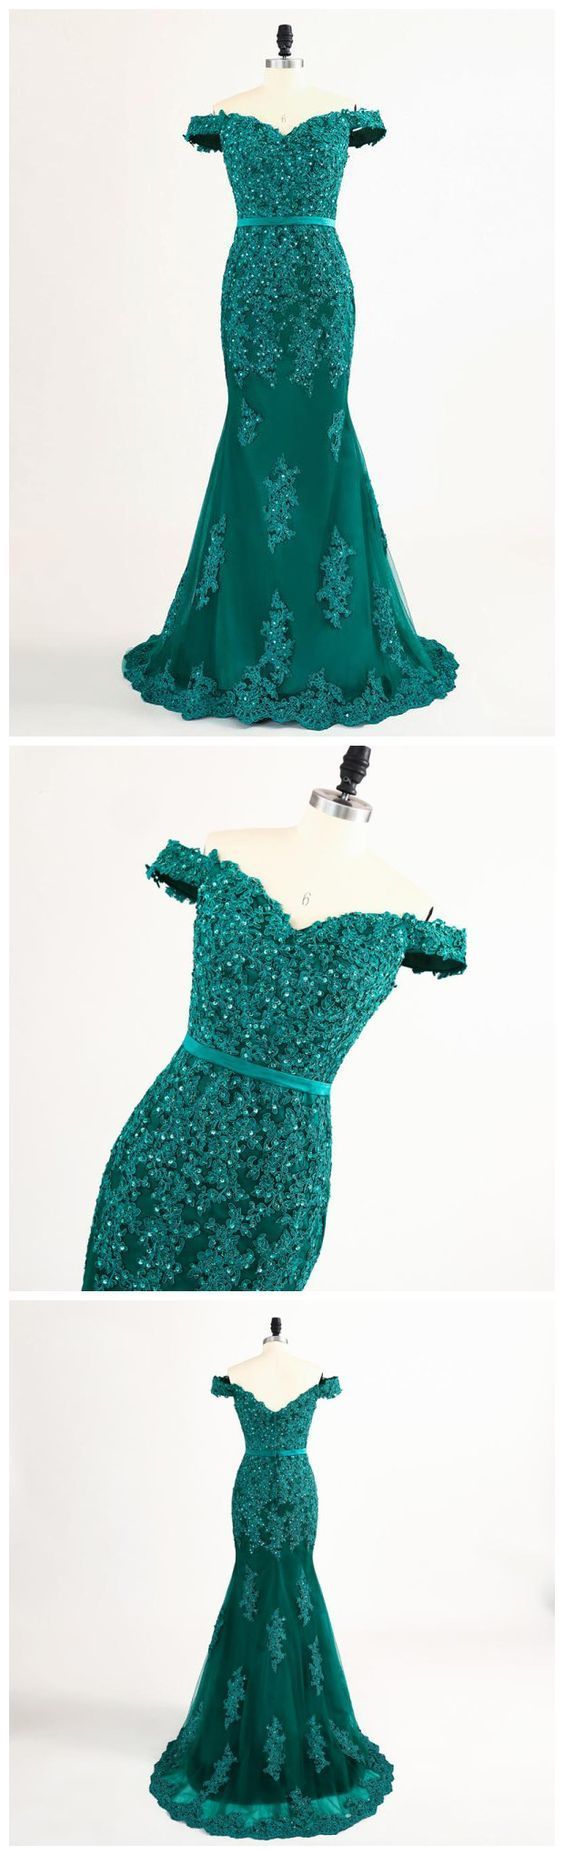 Lace Applique Teal Mermaid Evening Dress Featuring Off The Shoulder, Long Prom Dresses